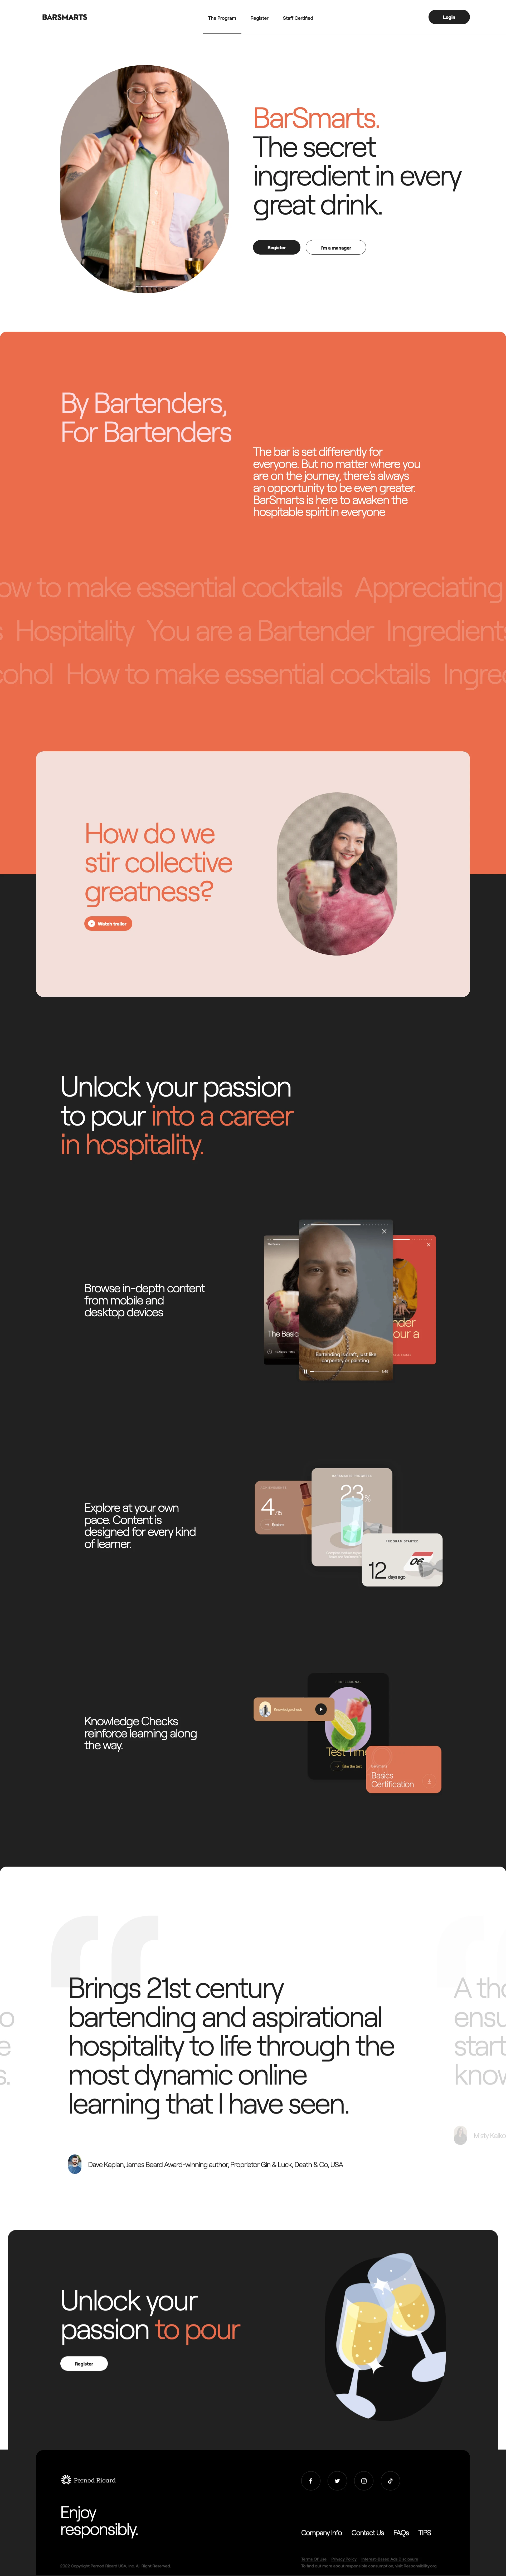 BarSmarts Landing Page Example: The bar is set differently for everyone. But no matter where you are on the journey, there’s always an opportunity to be even greater. BarSmarts is here to awaken the hospitable spirit in everyone.